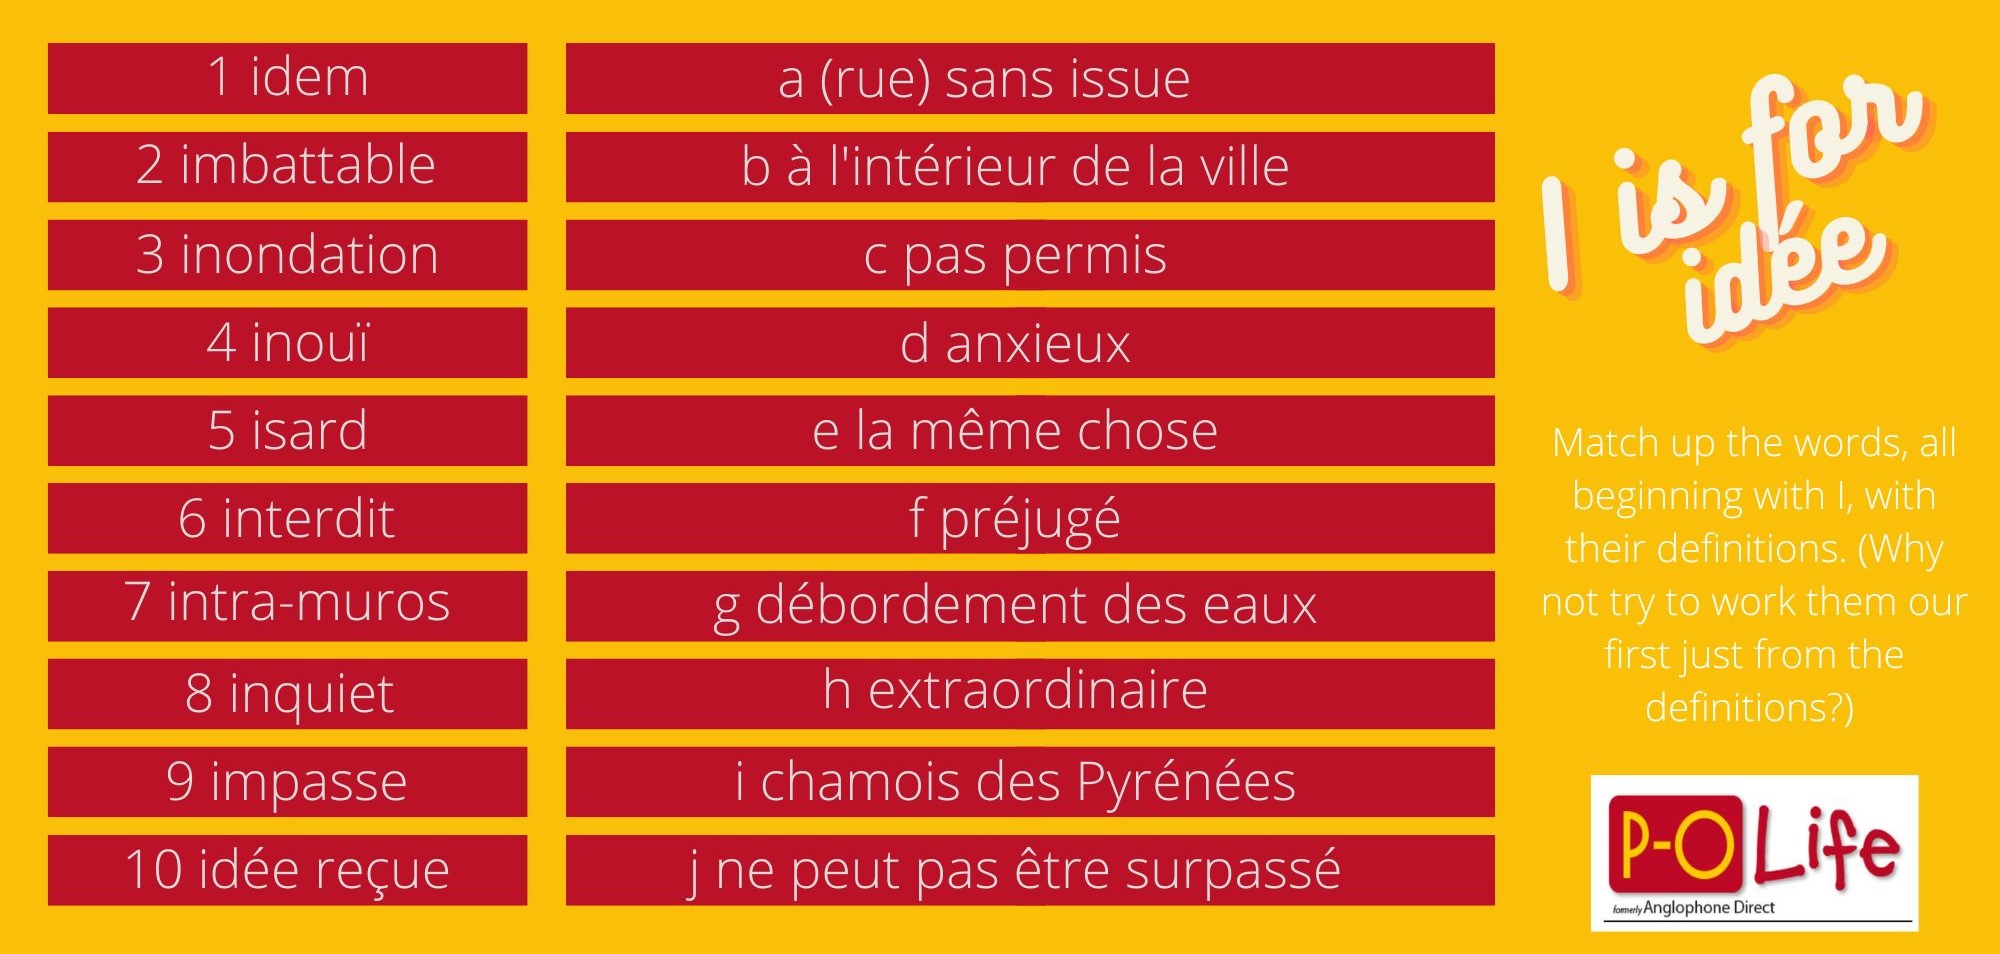 test your french